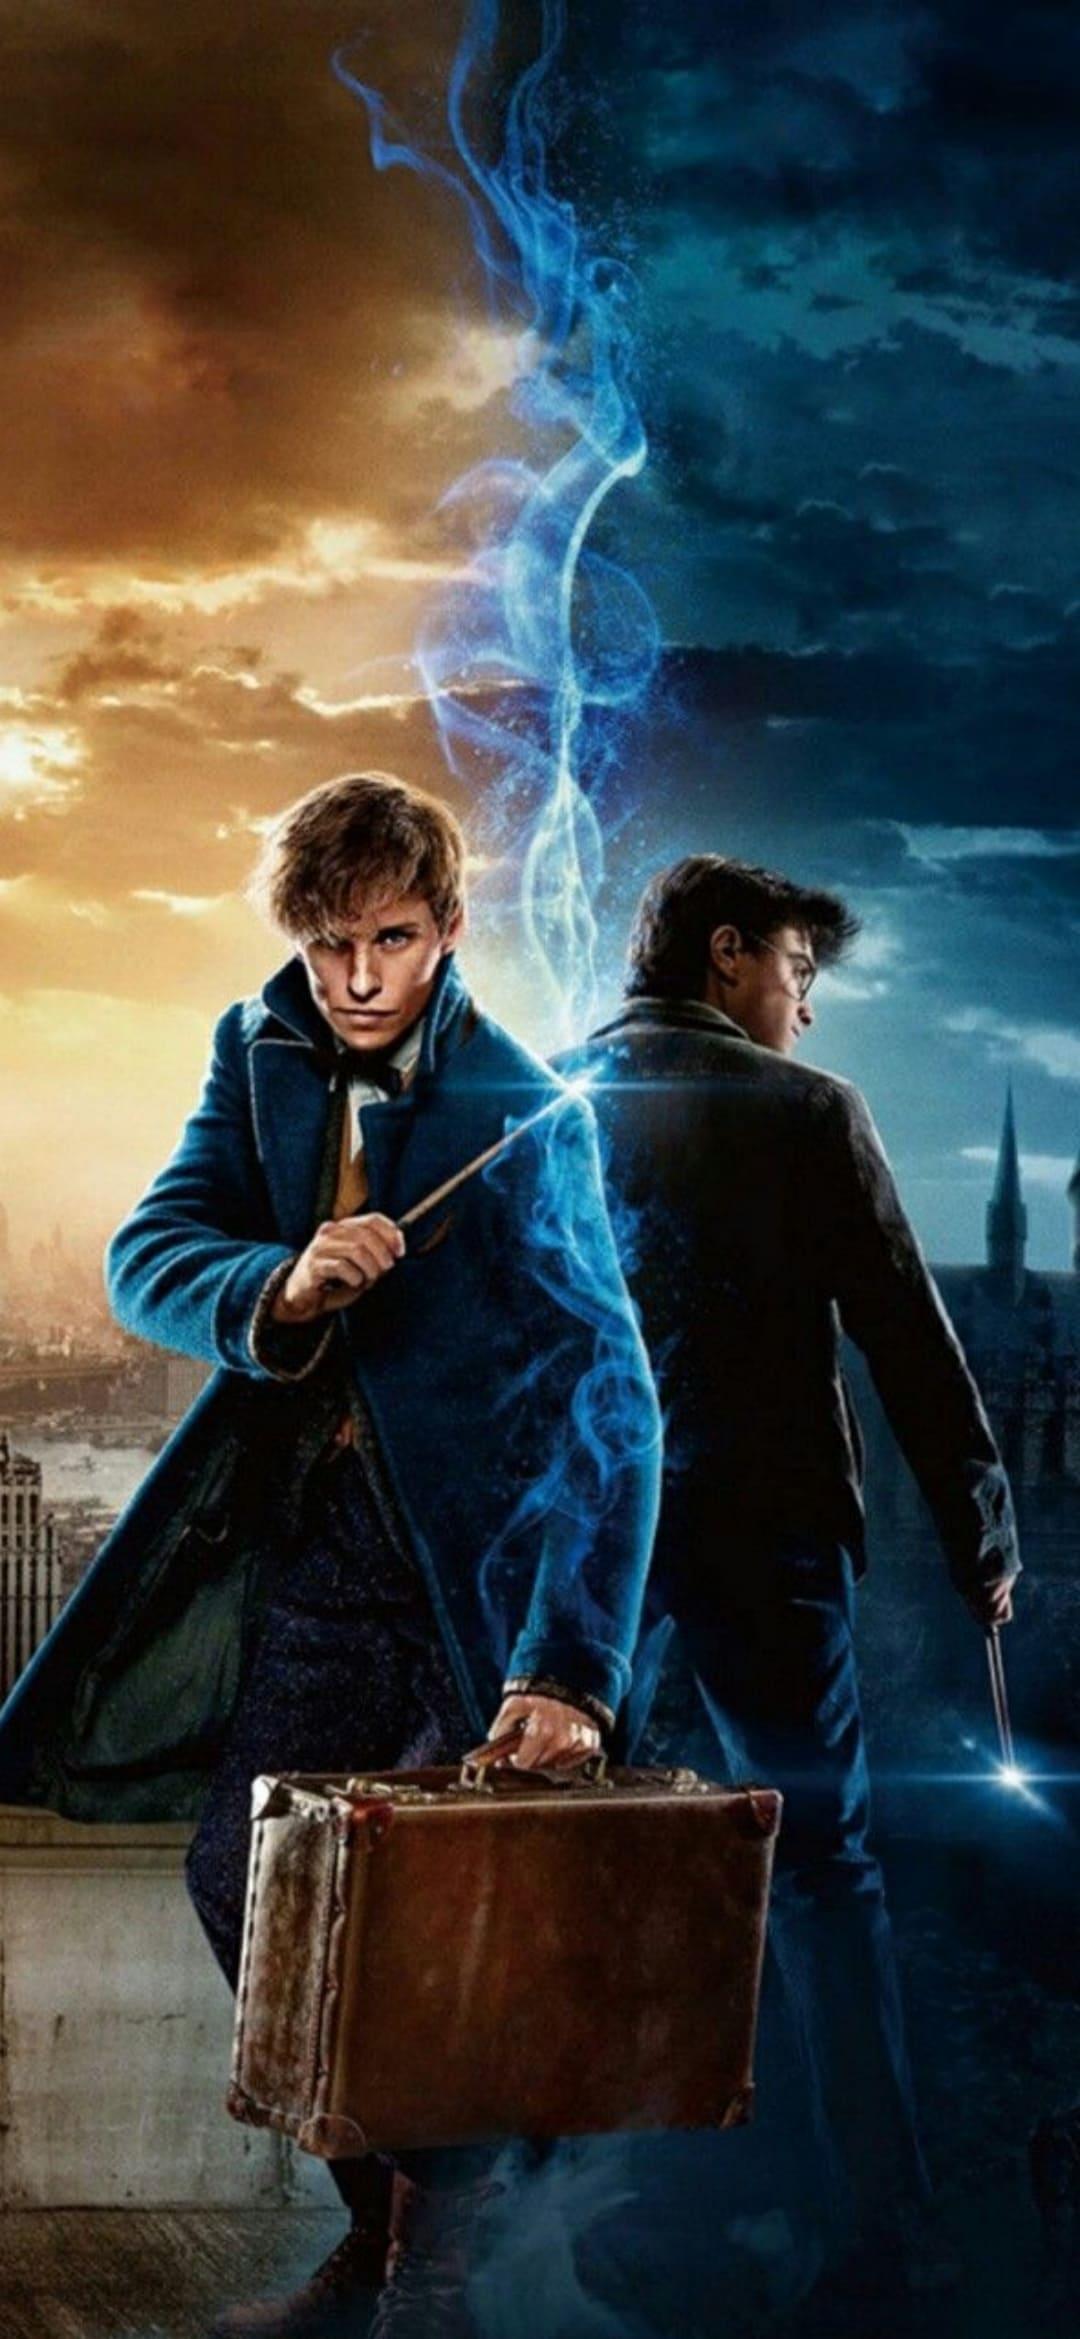 100+] Harry Potter Iphone Wallpapers